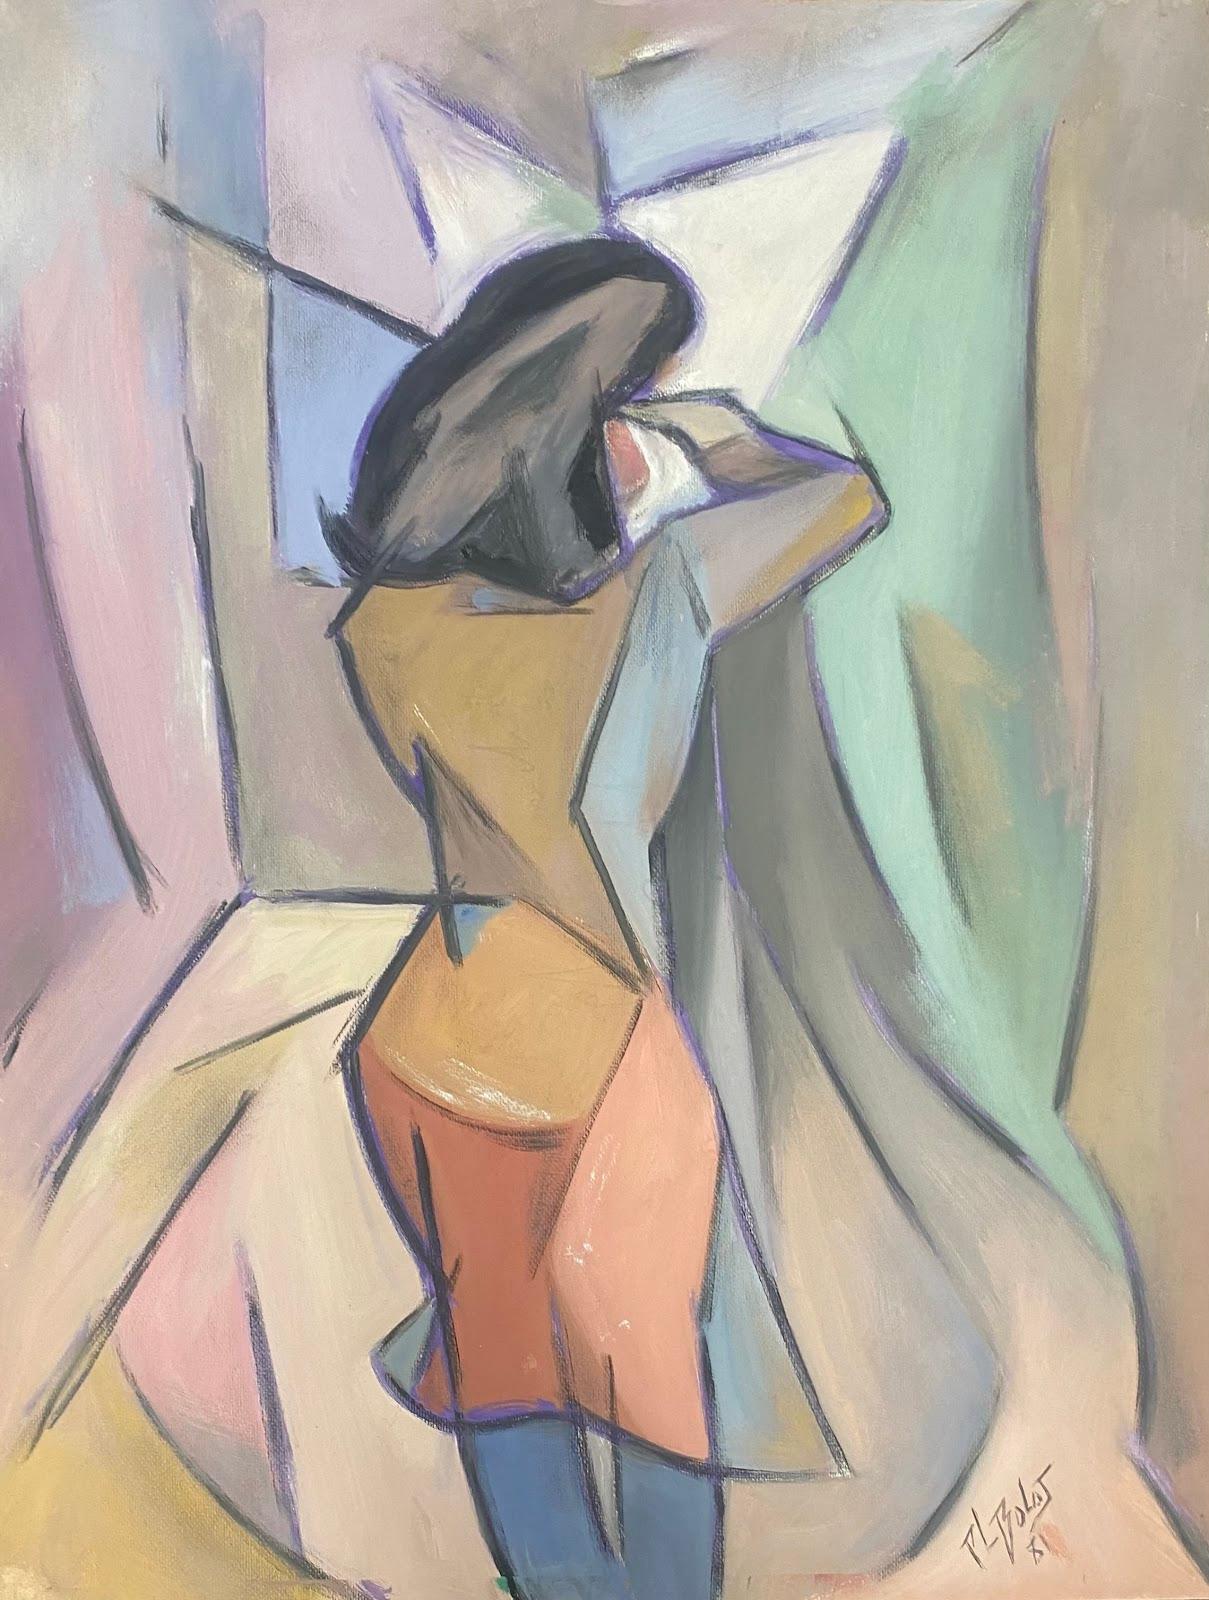 Paul-Louis Bolot (French 1918-2003) Nude Painting - 20th Century French Cubist Painting Purple Abstract Woman Playing Violin